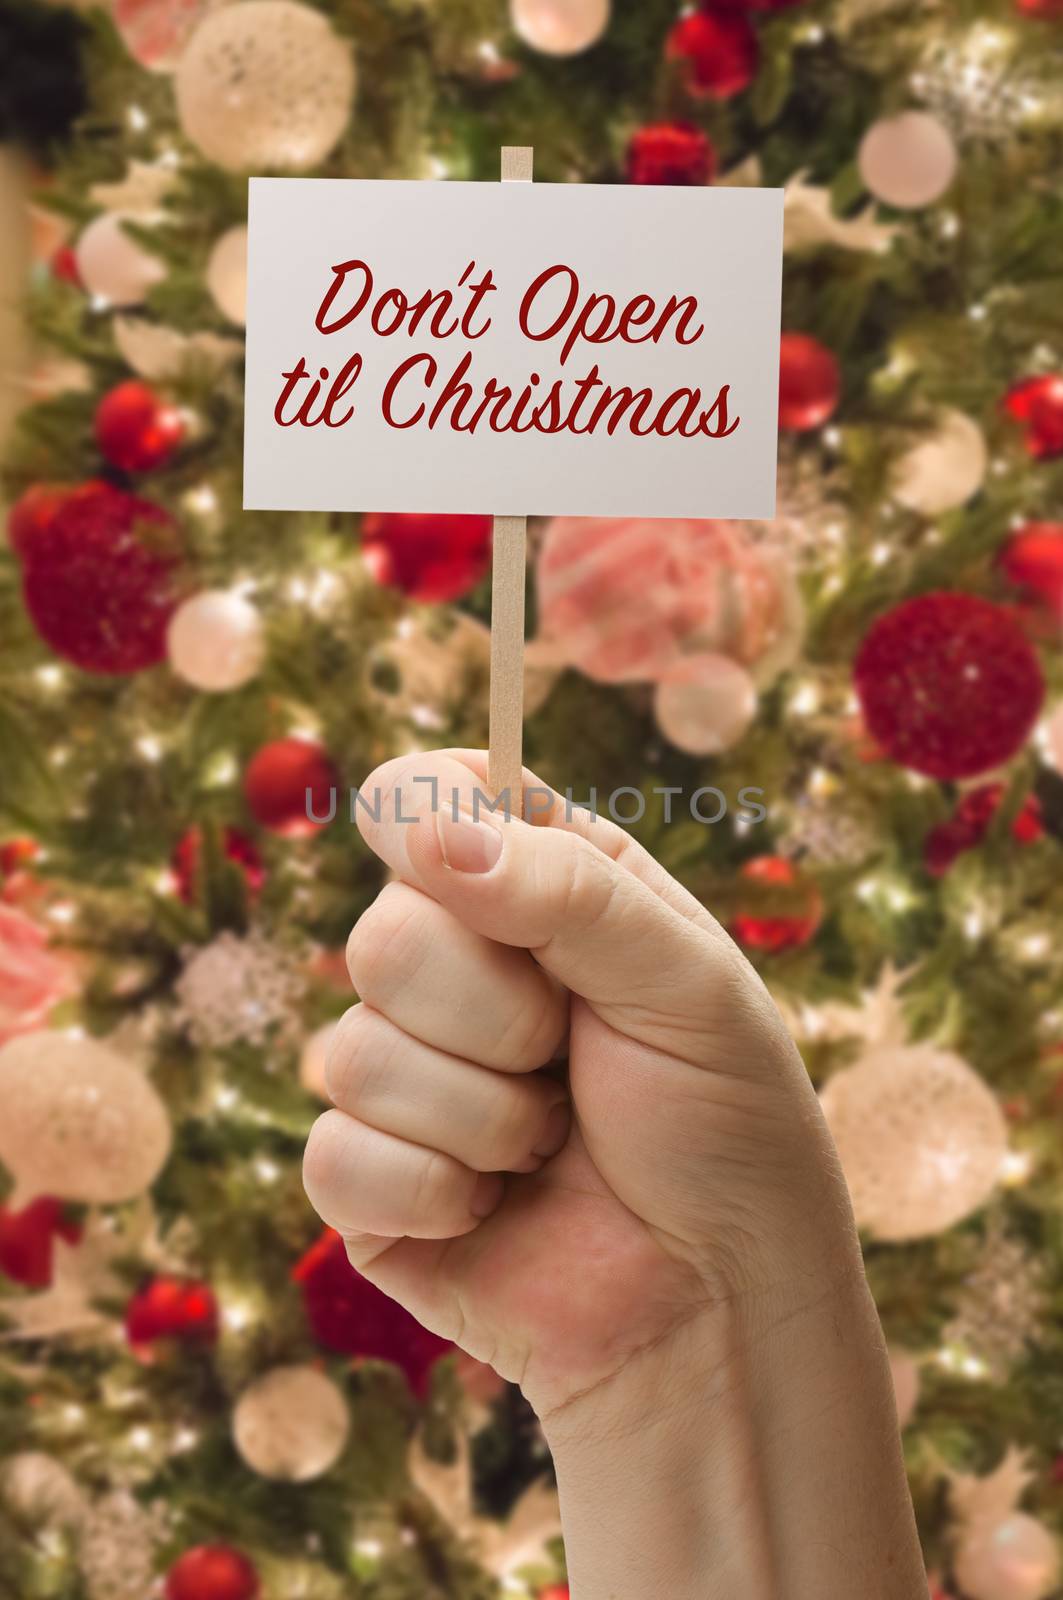 Hand Holding Don't Open Til Christmas Card In Front of Decorated Christmas Tree.